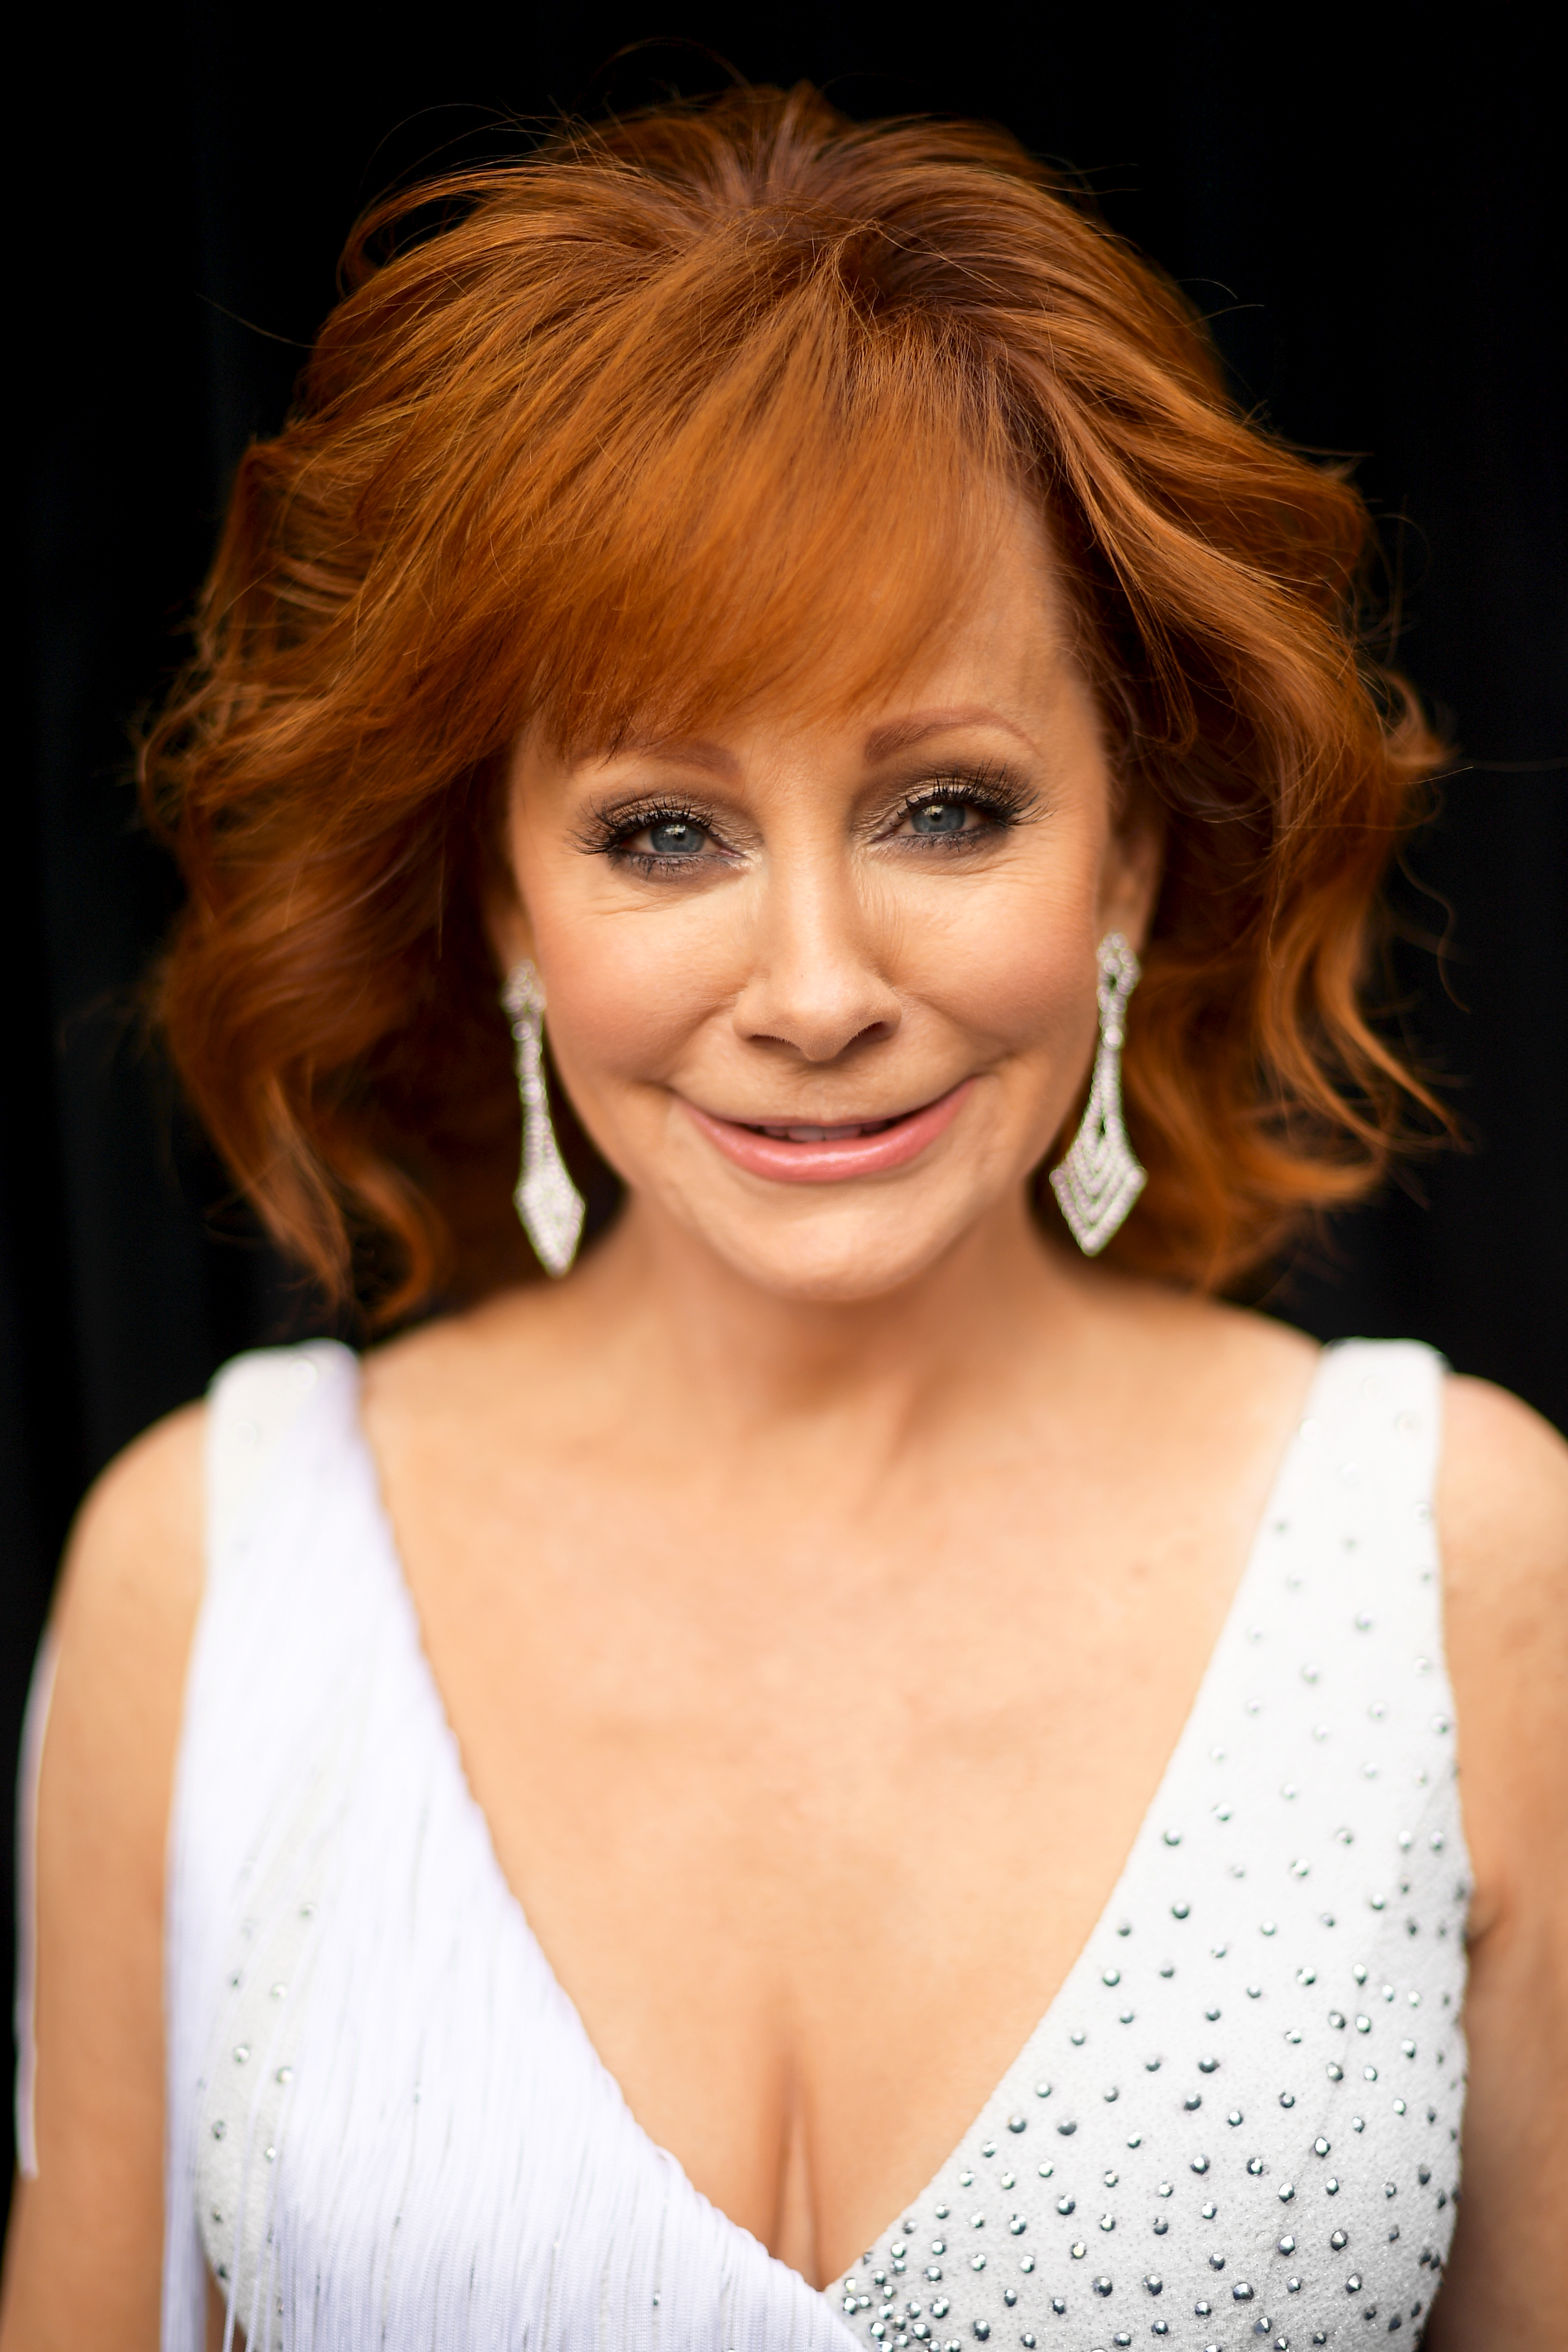 Reba McEntire attends the 53rd Academy of Country Music Awards on April 15, 2018 in Las Vegas, Nevada. | Source: Getty Images